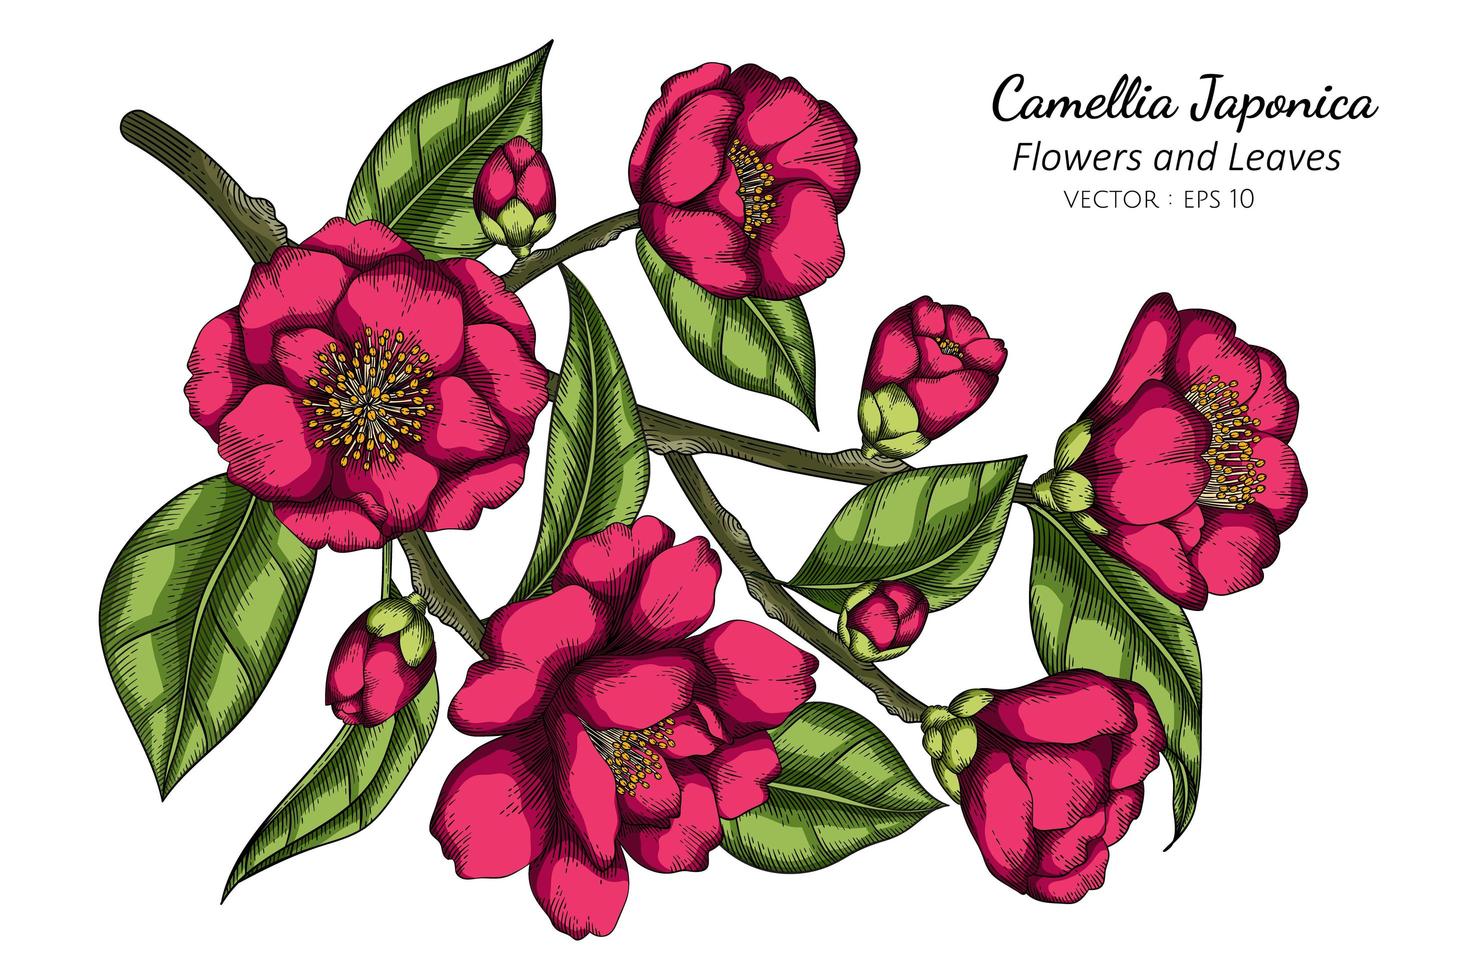 Pink Camellia Japonica flower and leaf drawing illustration with line art on white background vector